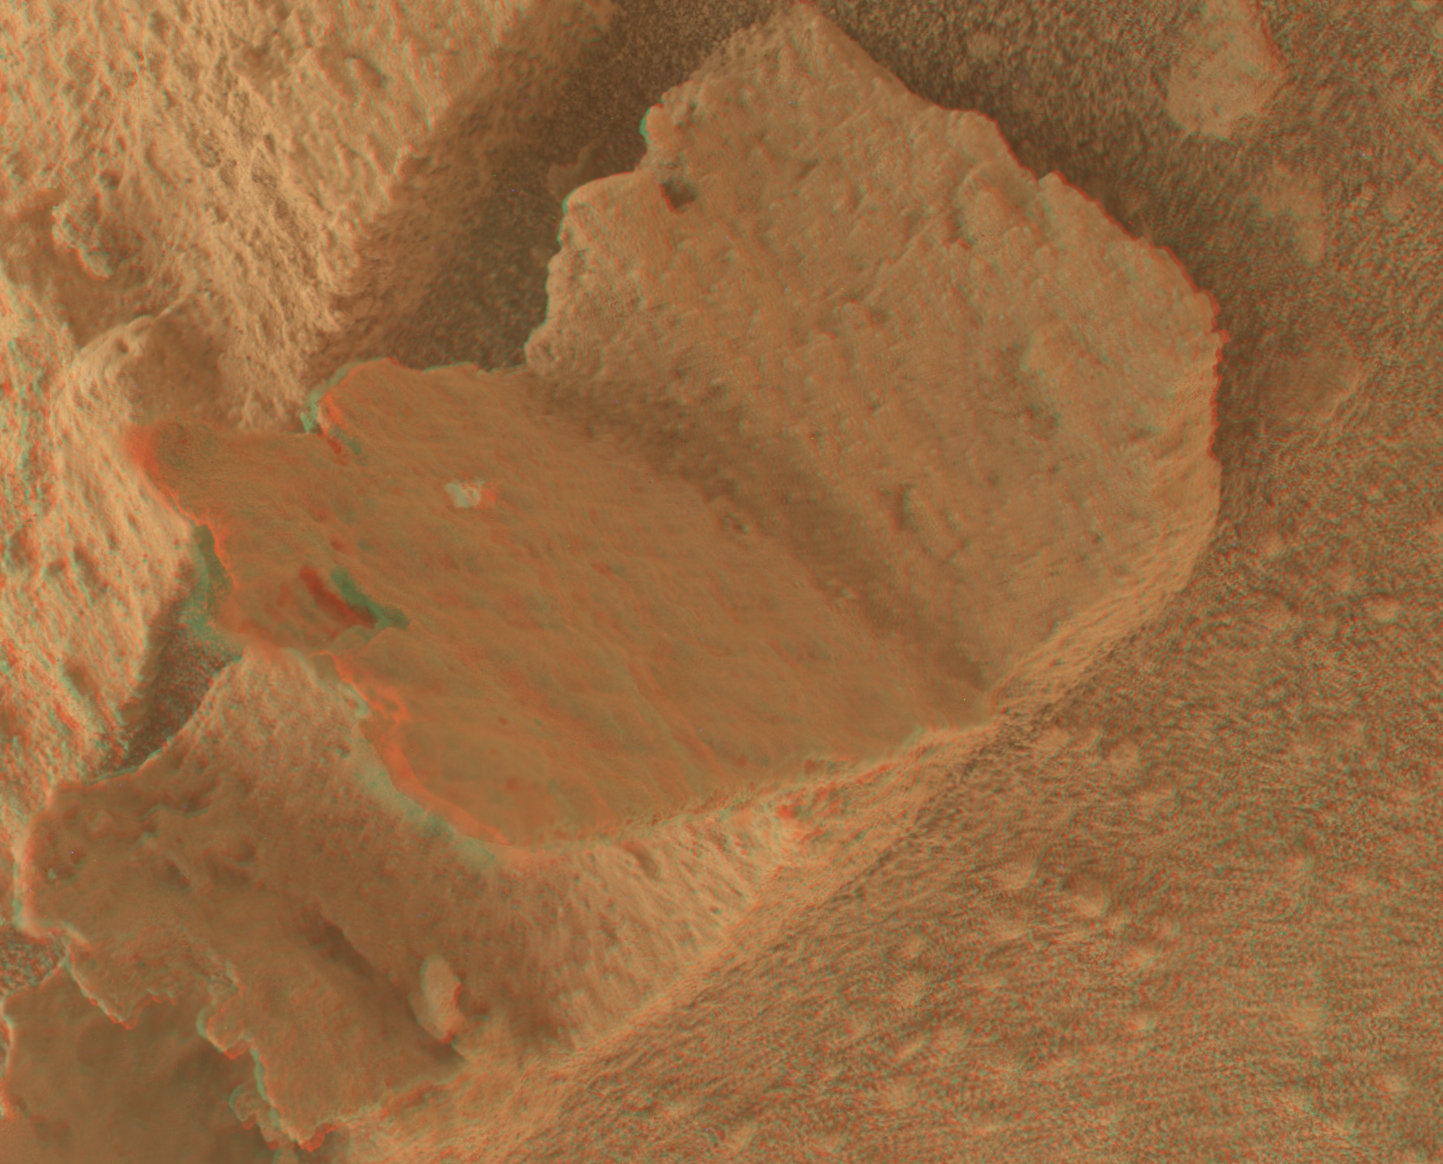 Figure A shows the image in an anaglyph that can be viewed with red-blue 3D glasses.